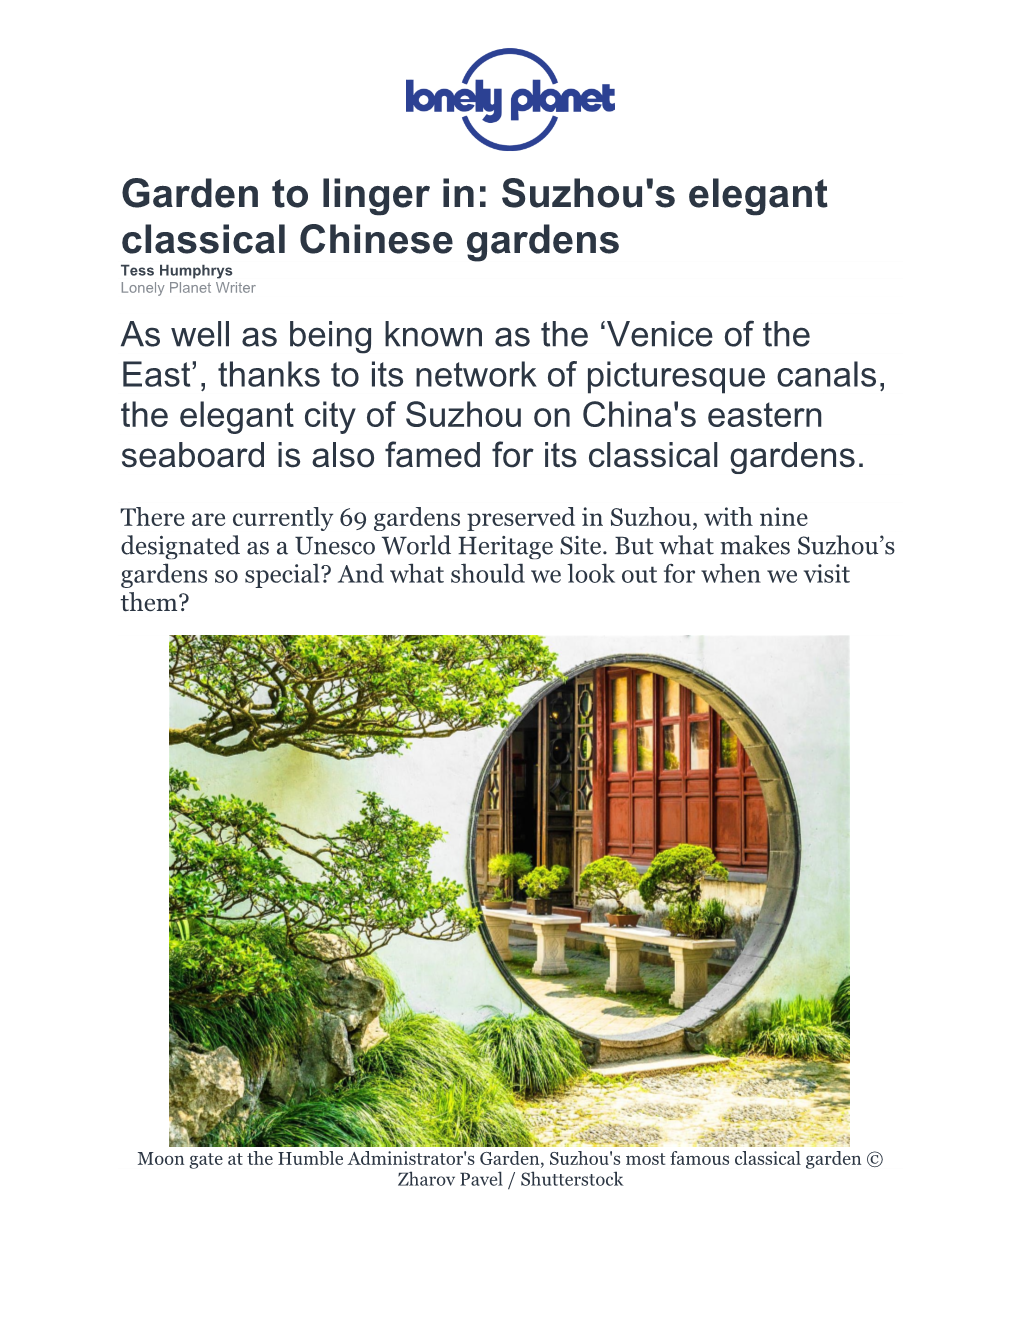 Garden to Linger In: Suzhou's Elegant Classical Chinese Gardens Tess Humphrys Lonely Planet Writer